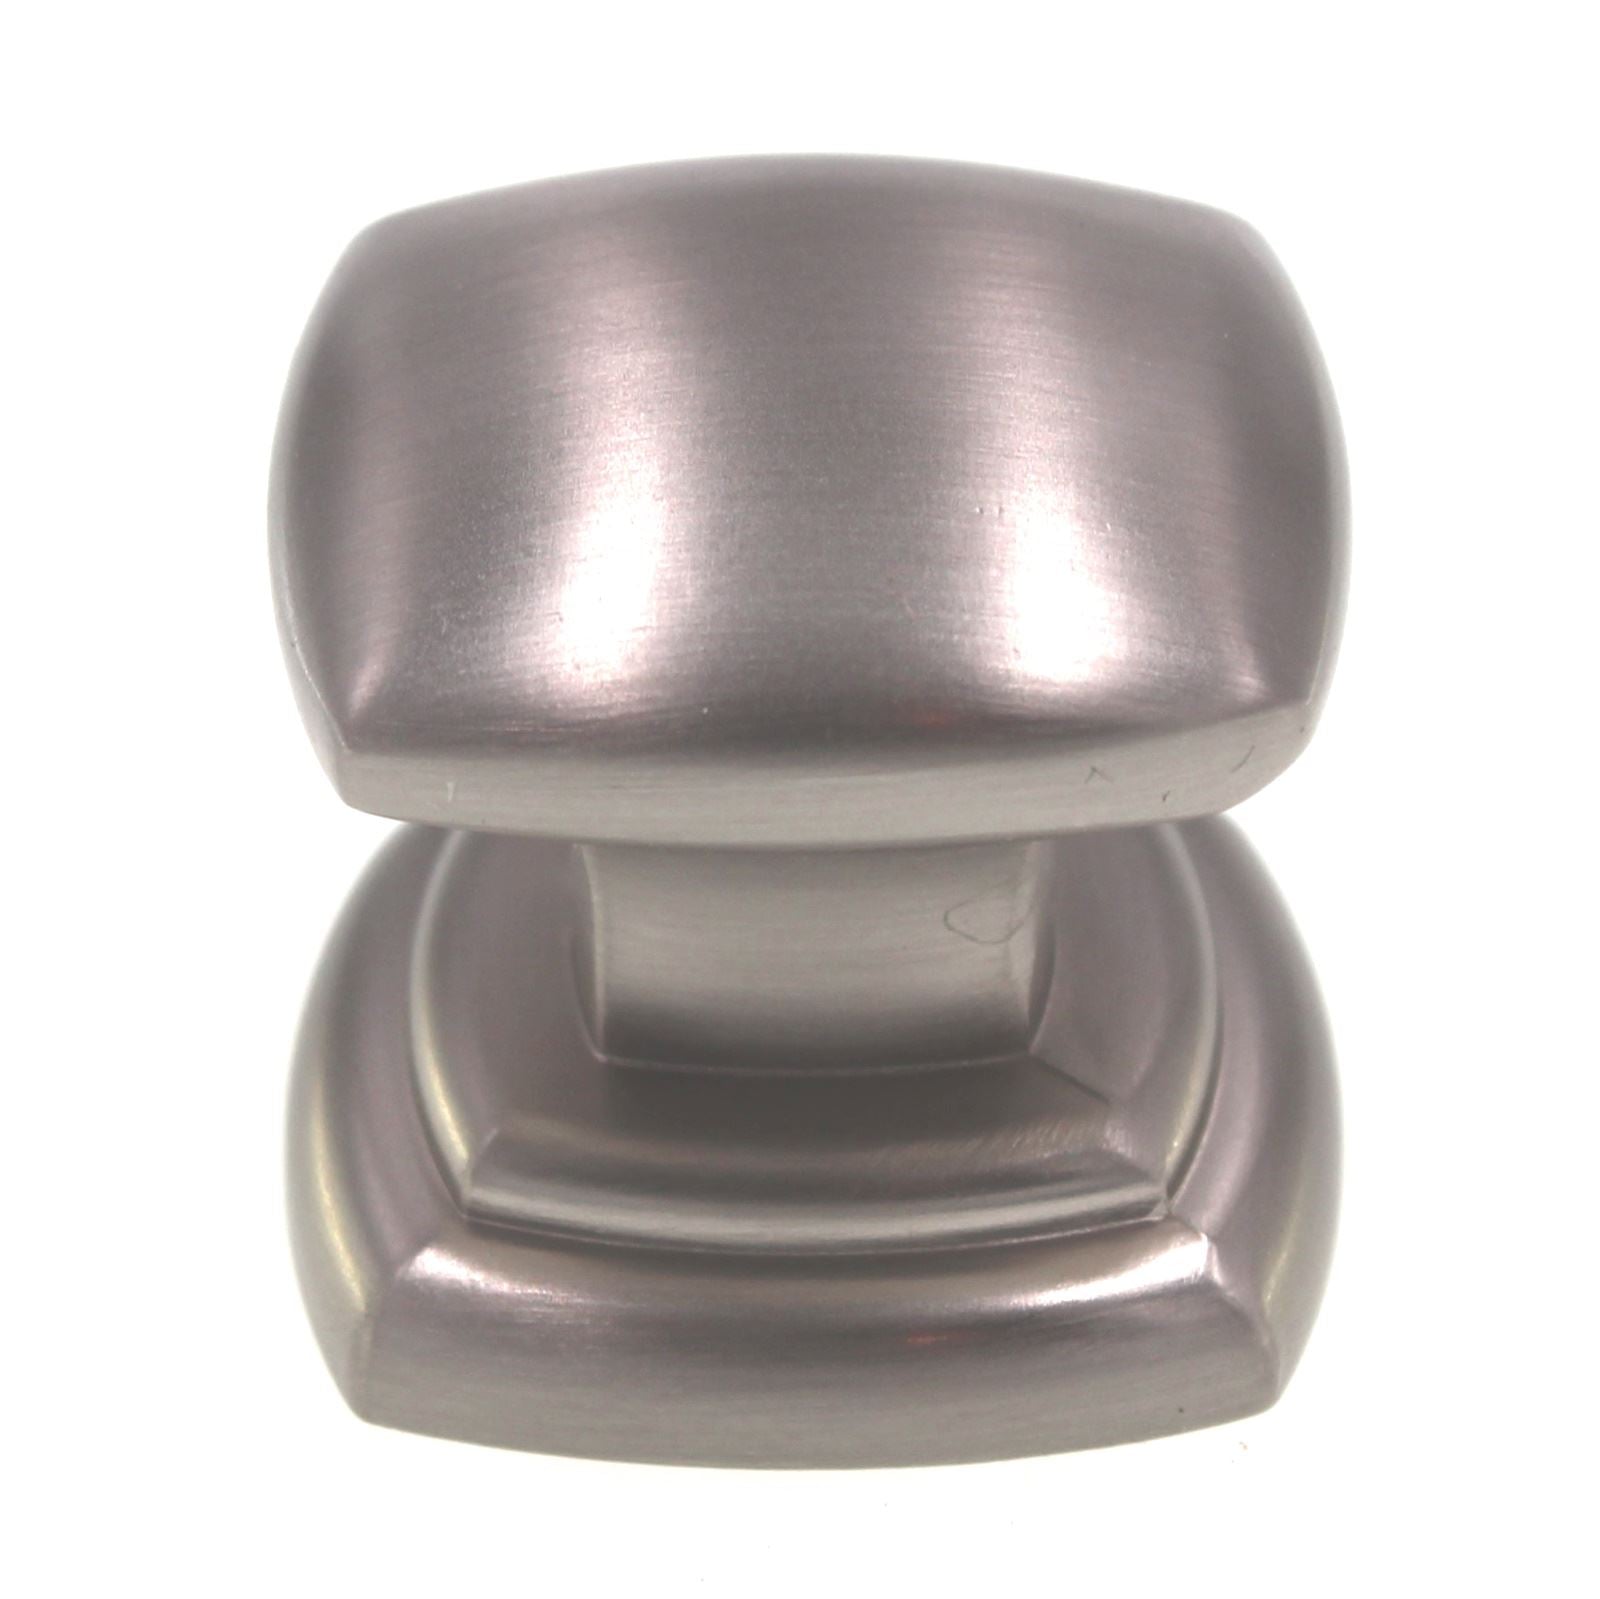 Hickory Hardware Euro-Contemporary 1 1/4" Square Knob Stainless Steel P3181-SS